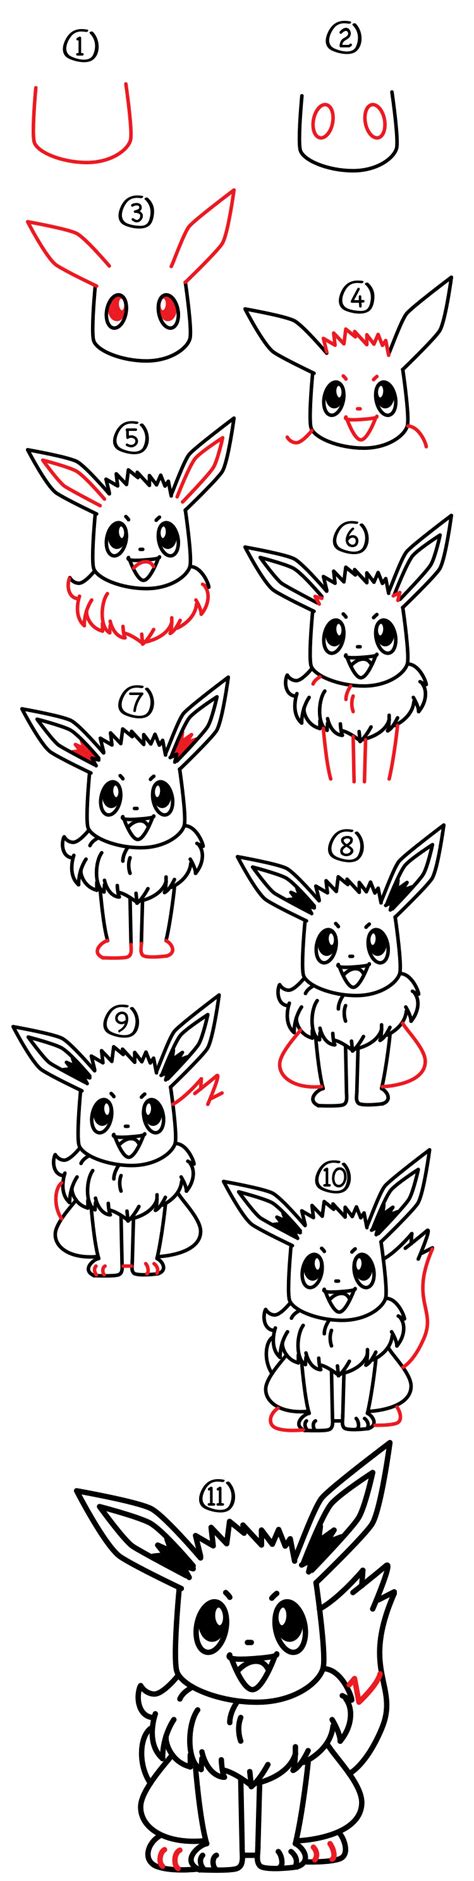 How To Draw Pokemon Eevee Step By Step Easy And Cute